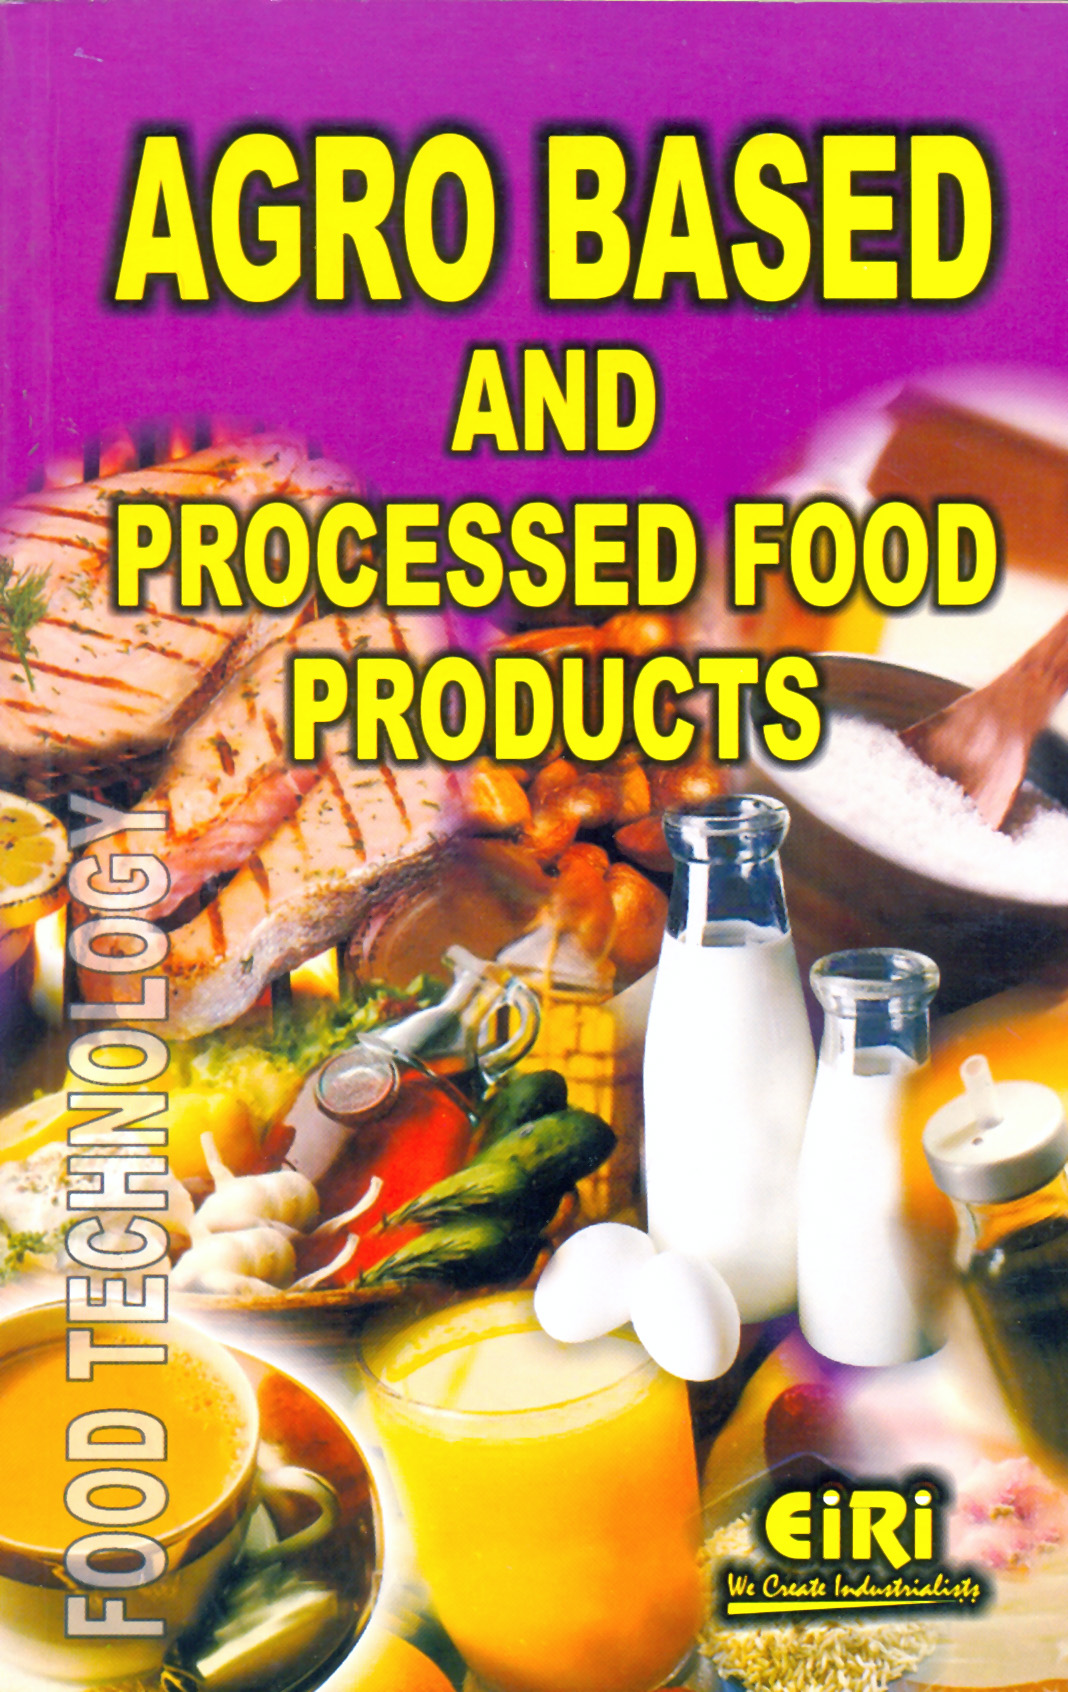 agro based and processed food products (hand book)